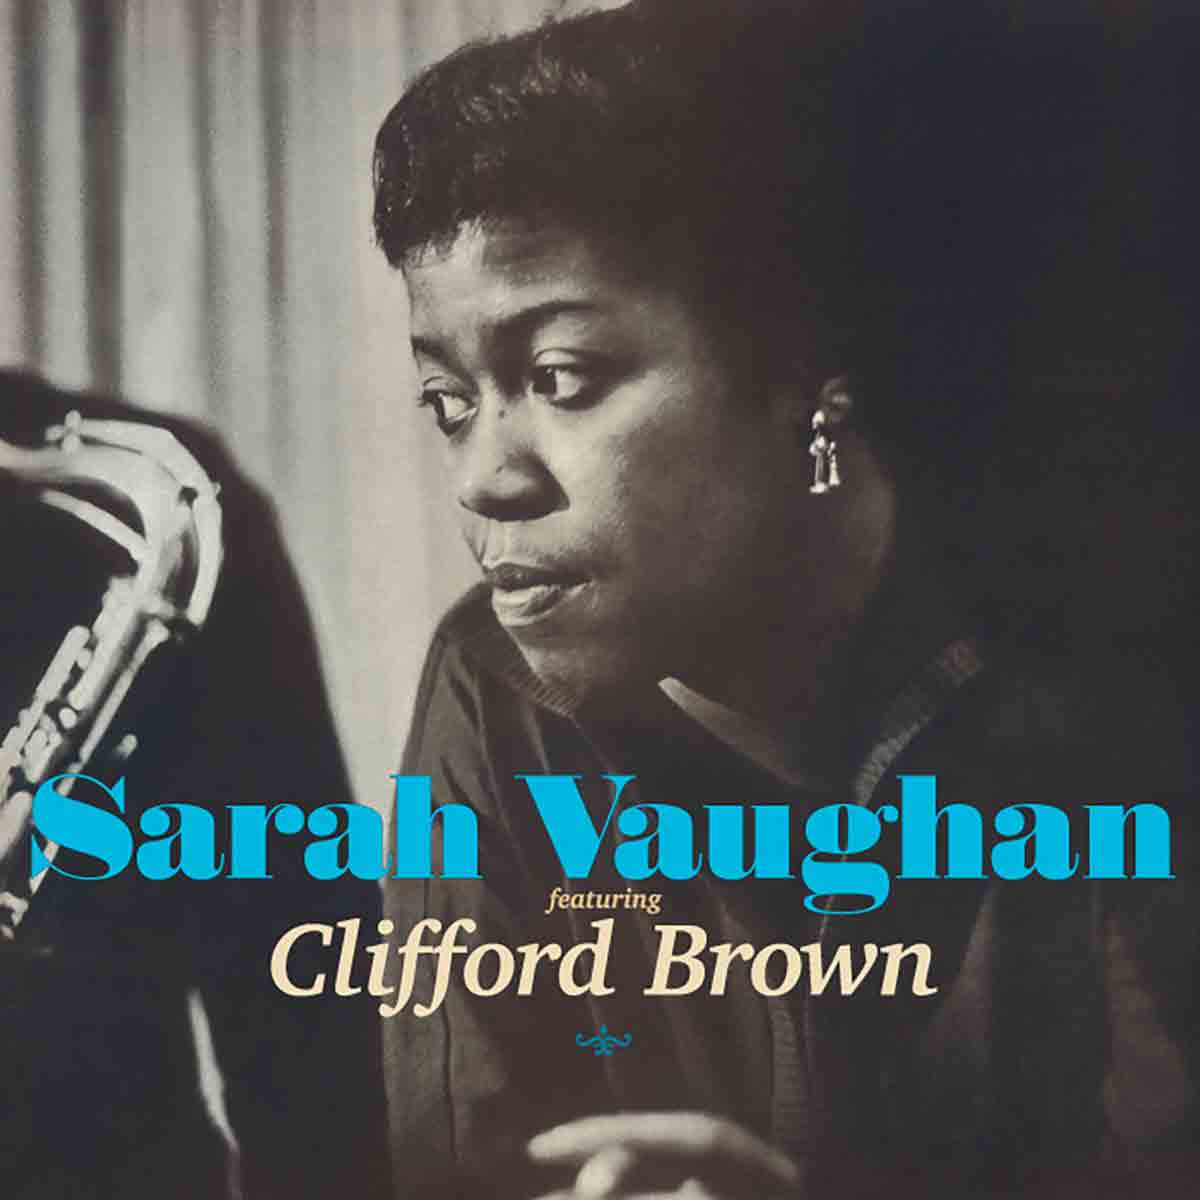 Featuring Clifford Brown